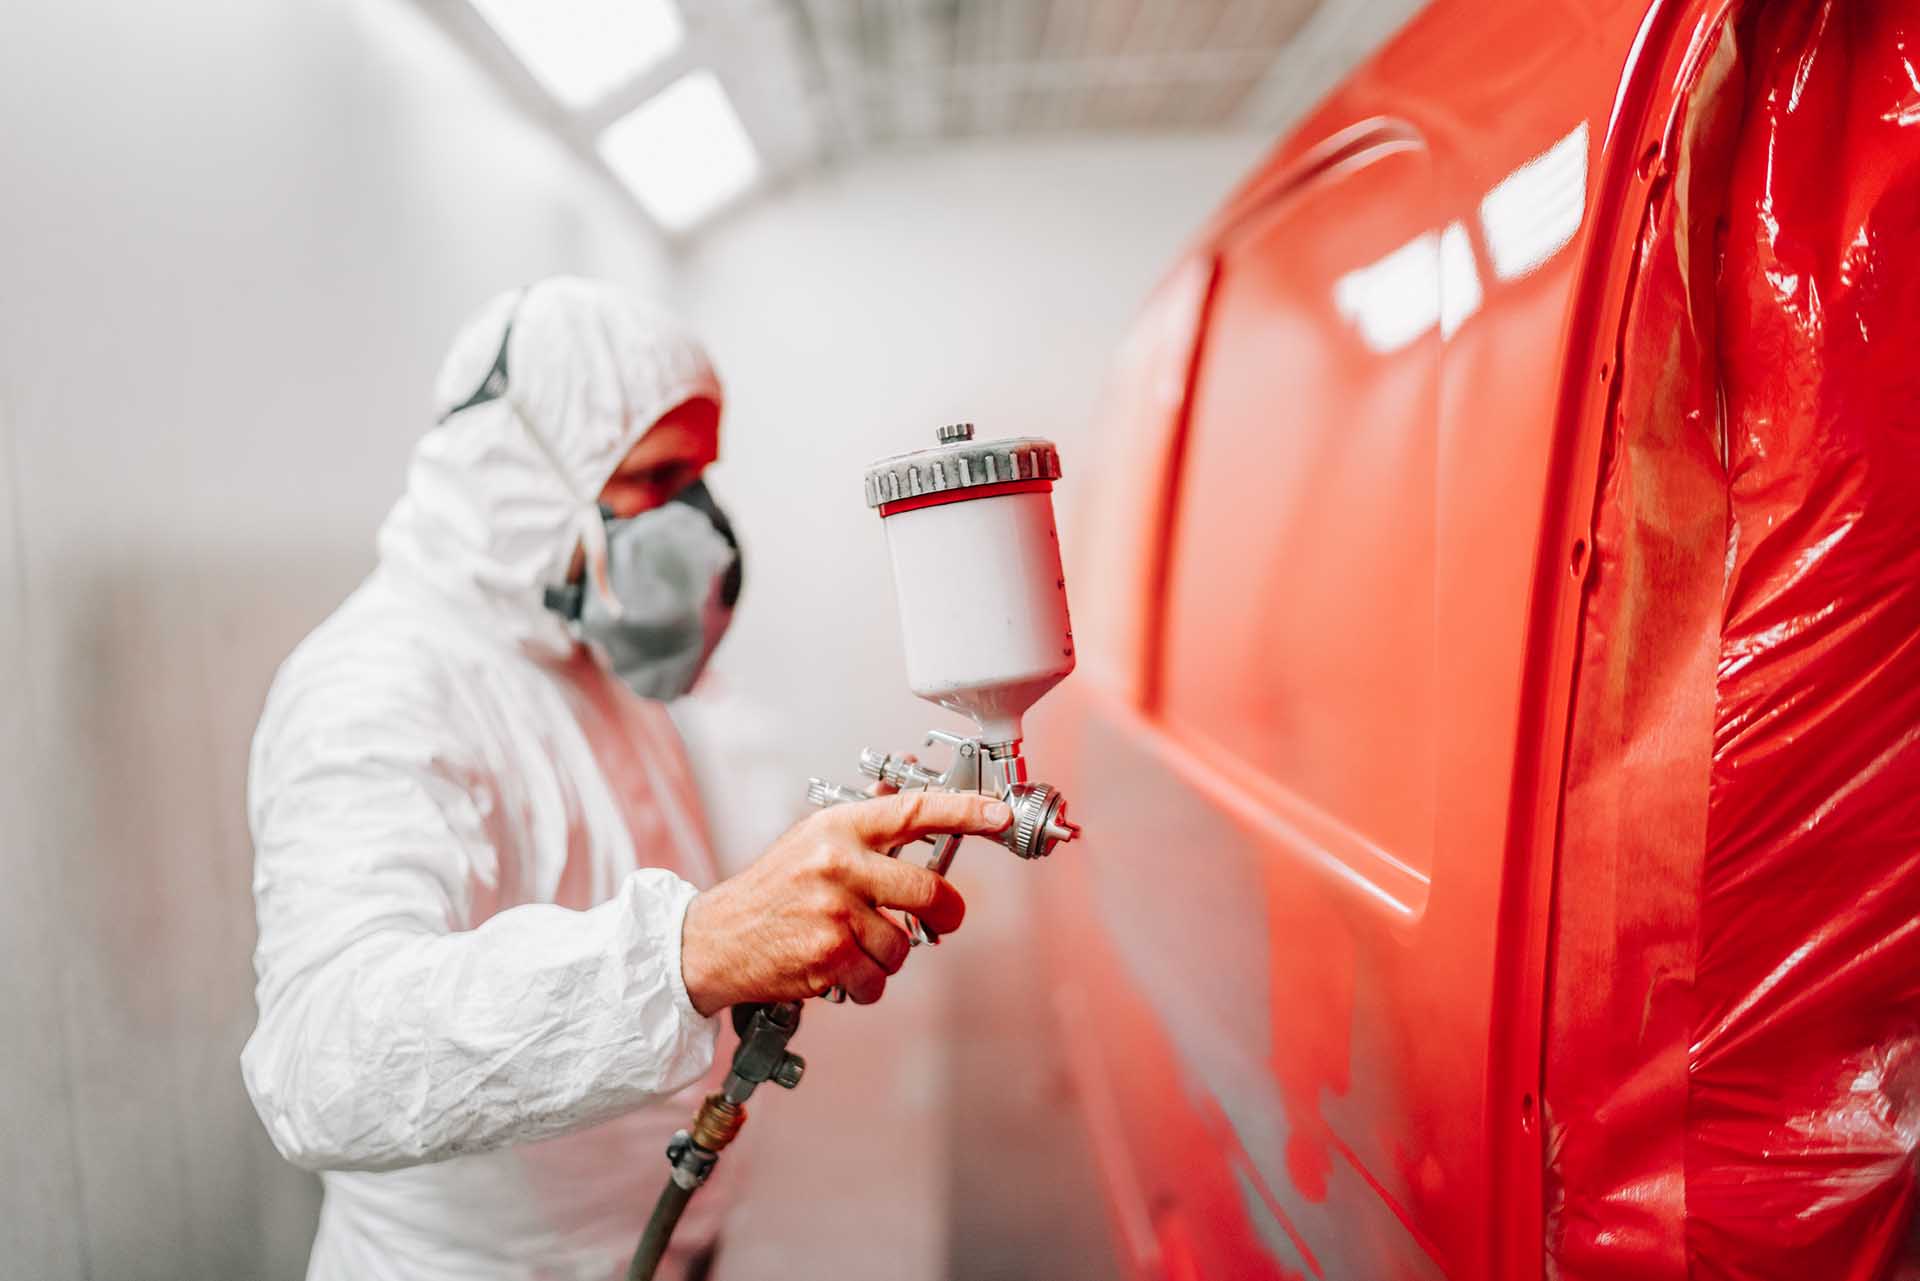 Worker Painting A Car Using A Paint Spray Gun L6FHL8Z Resize 